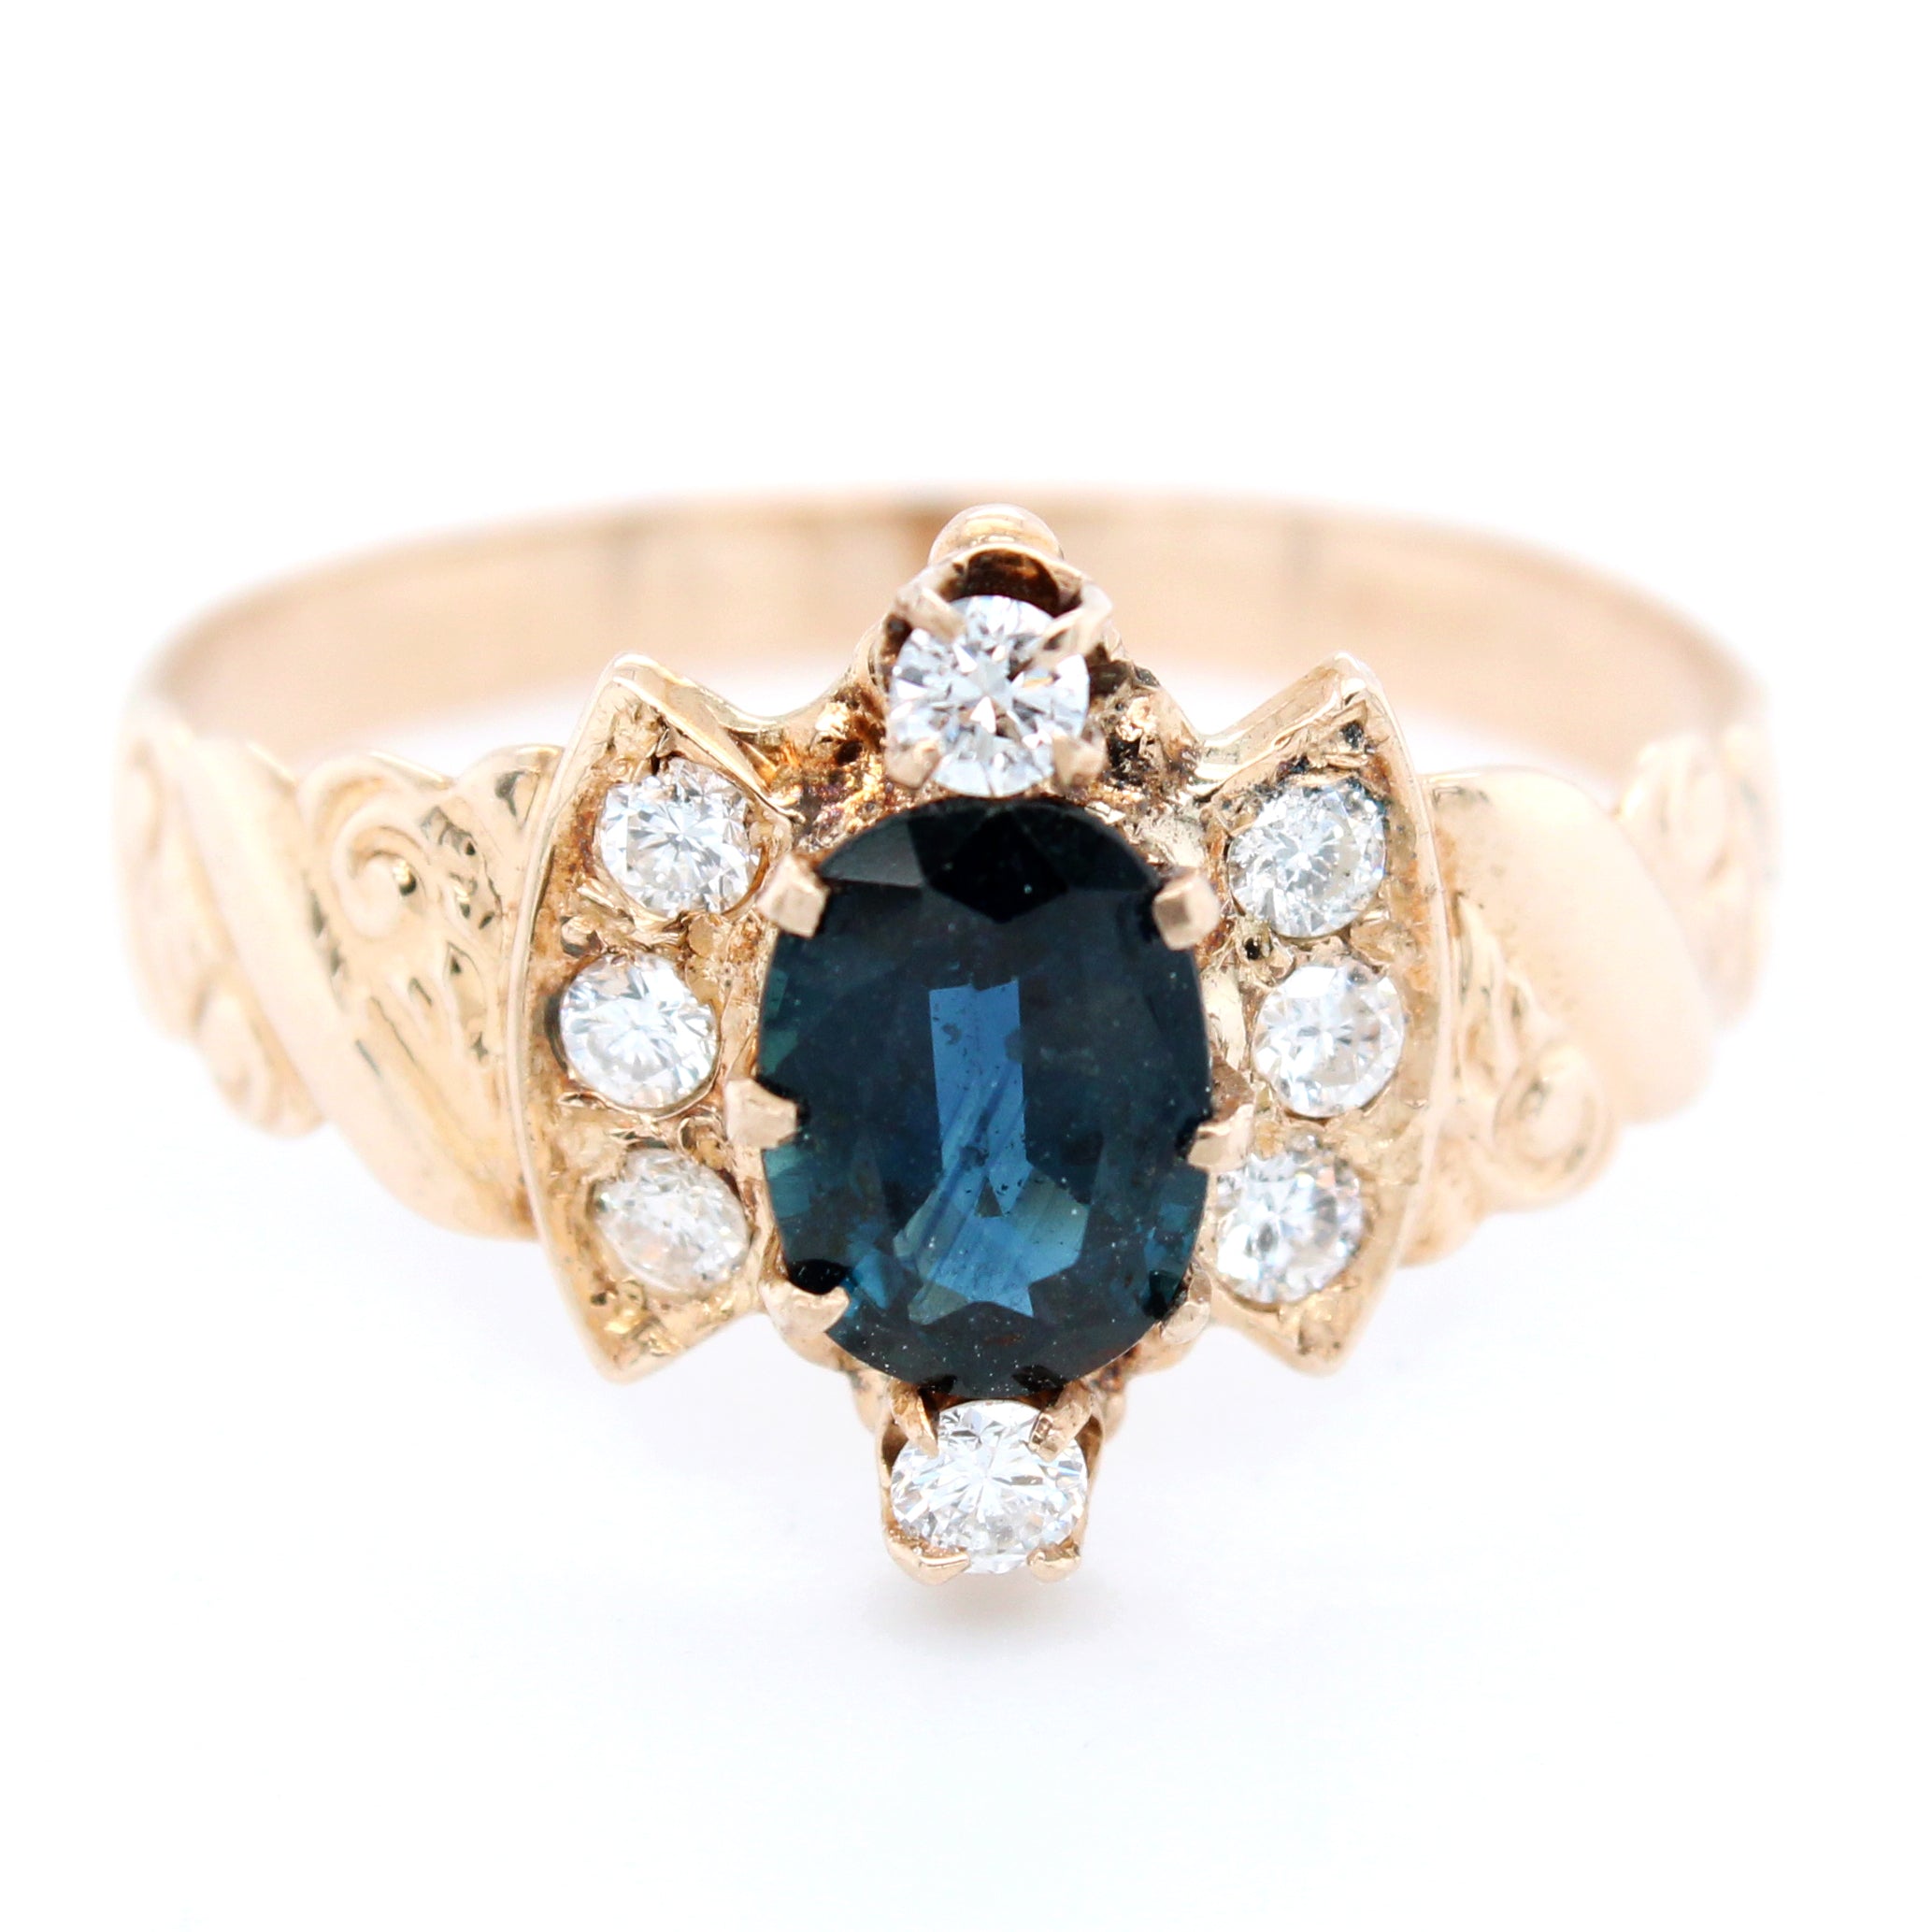 Retro 0.85ct Sapphire & Diamond Cocktail Ring in 14k Yellow Gold - Size 7.5